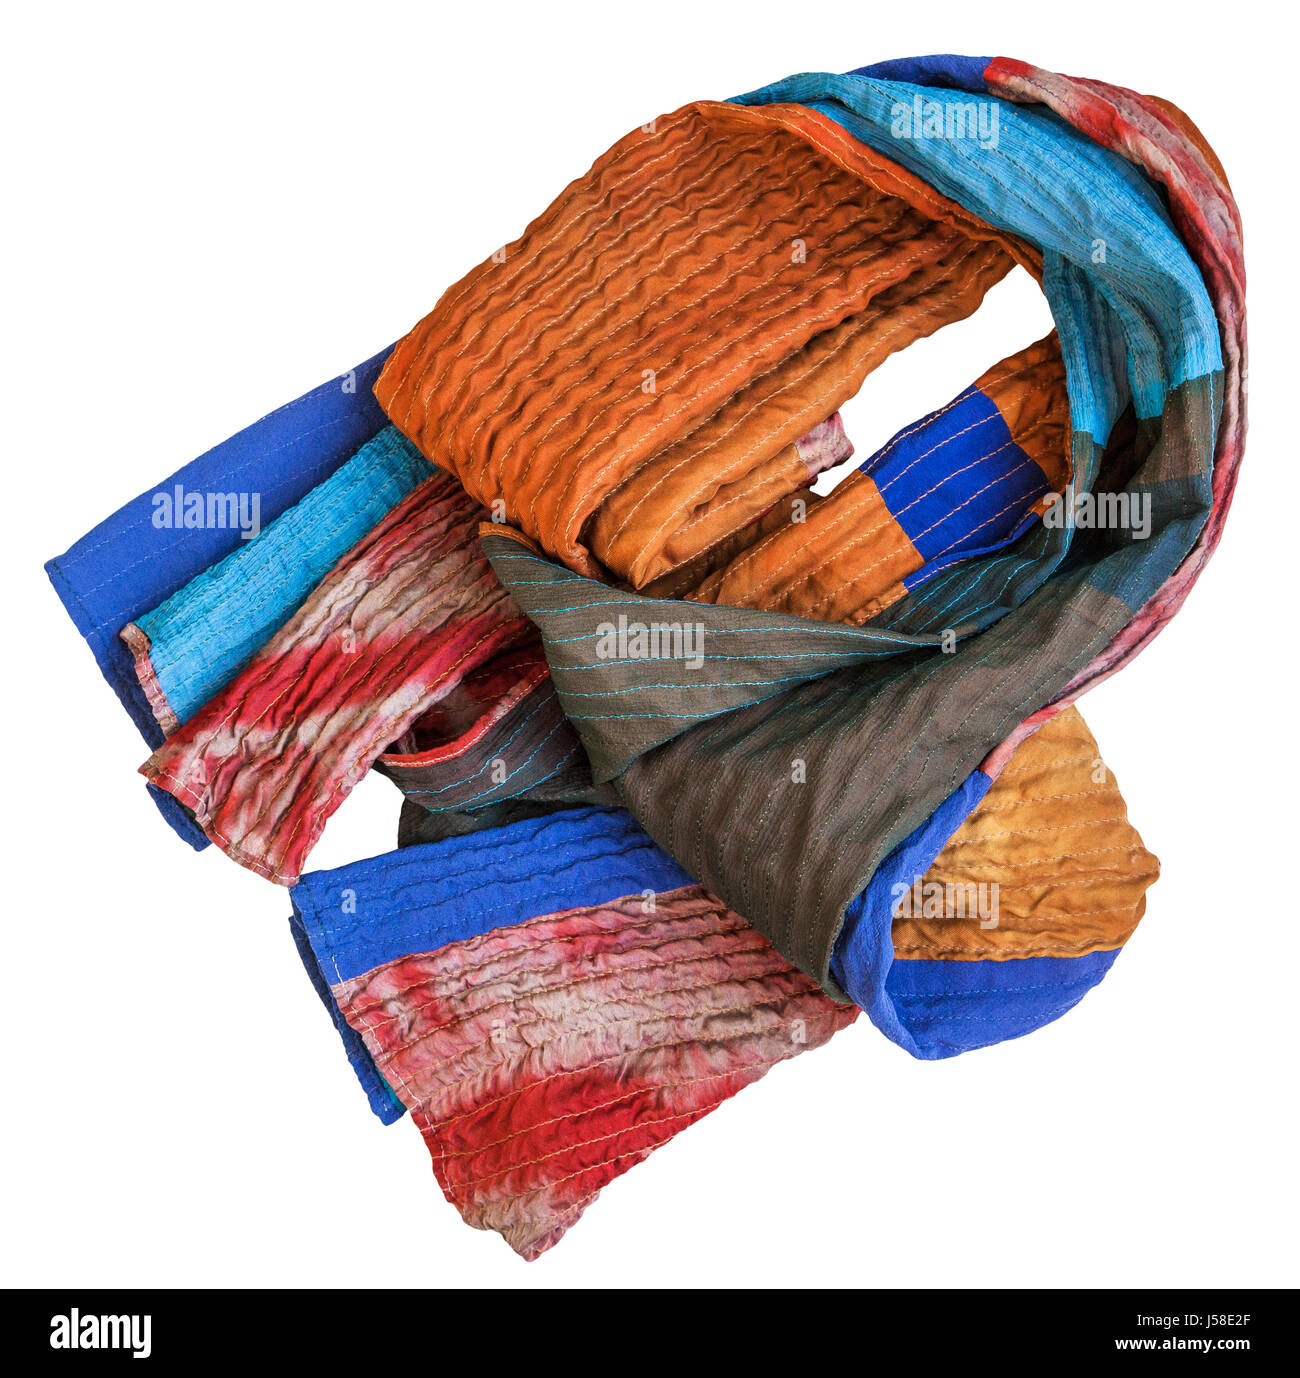 folded stitched patchwork scarf from batik and painted silk fabric pieces isolated on white background Stock Photo